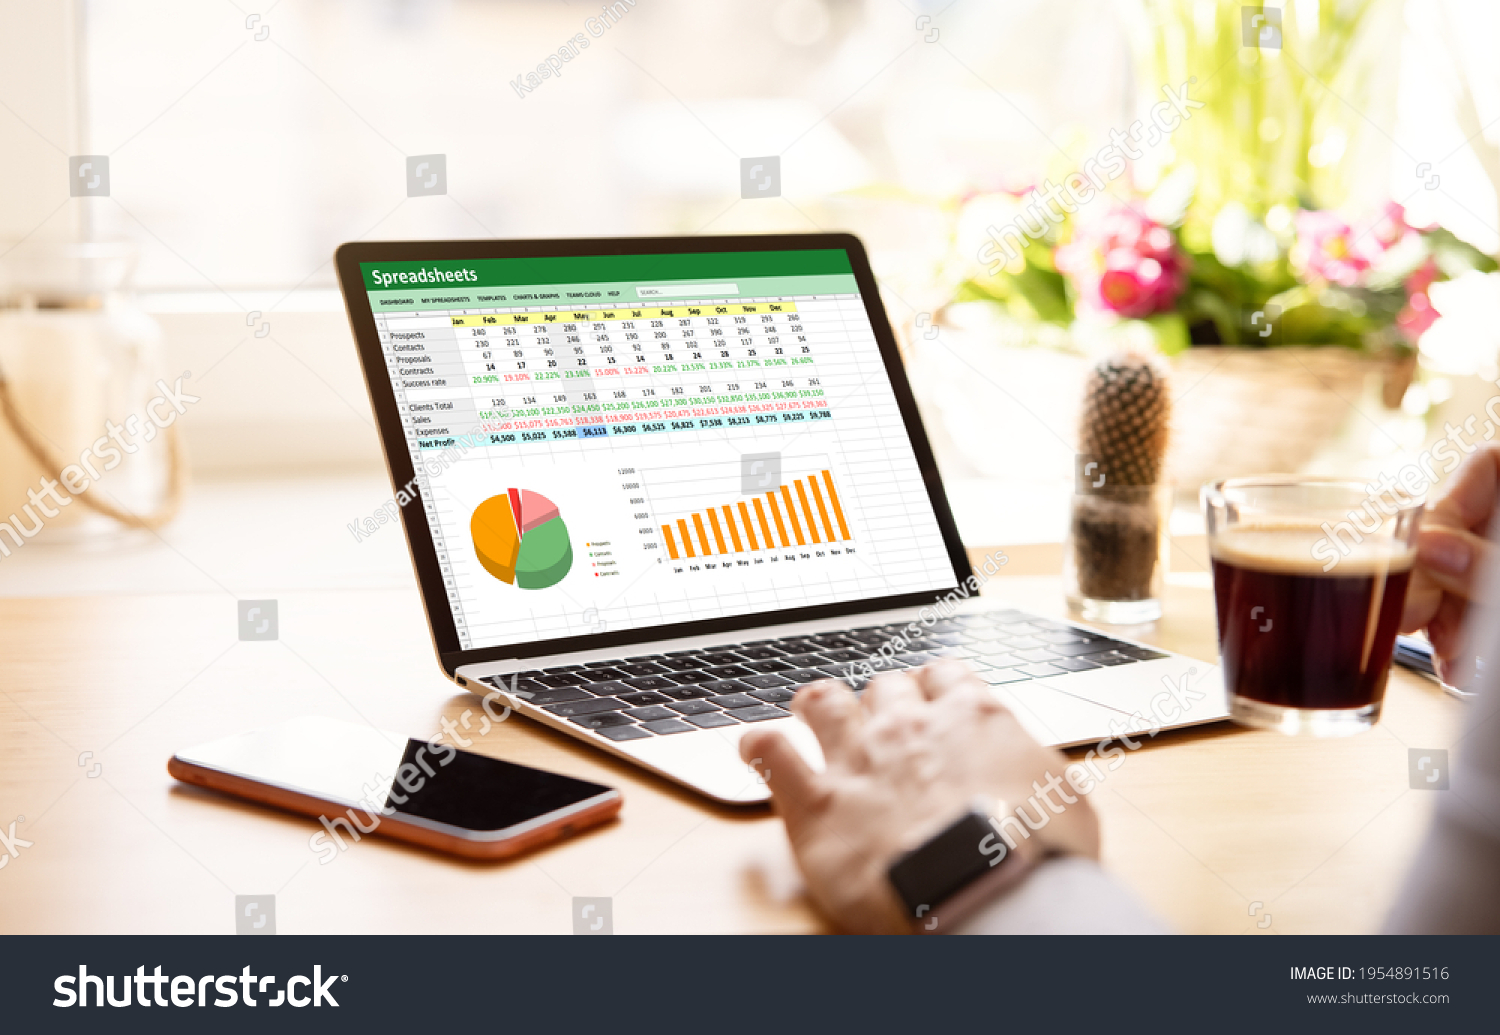 Woman working with spreadsheets on laptop computer #1954891516